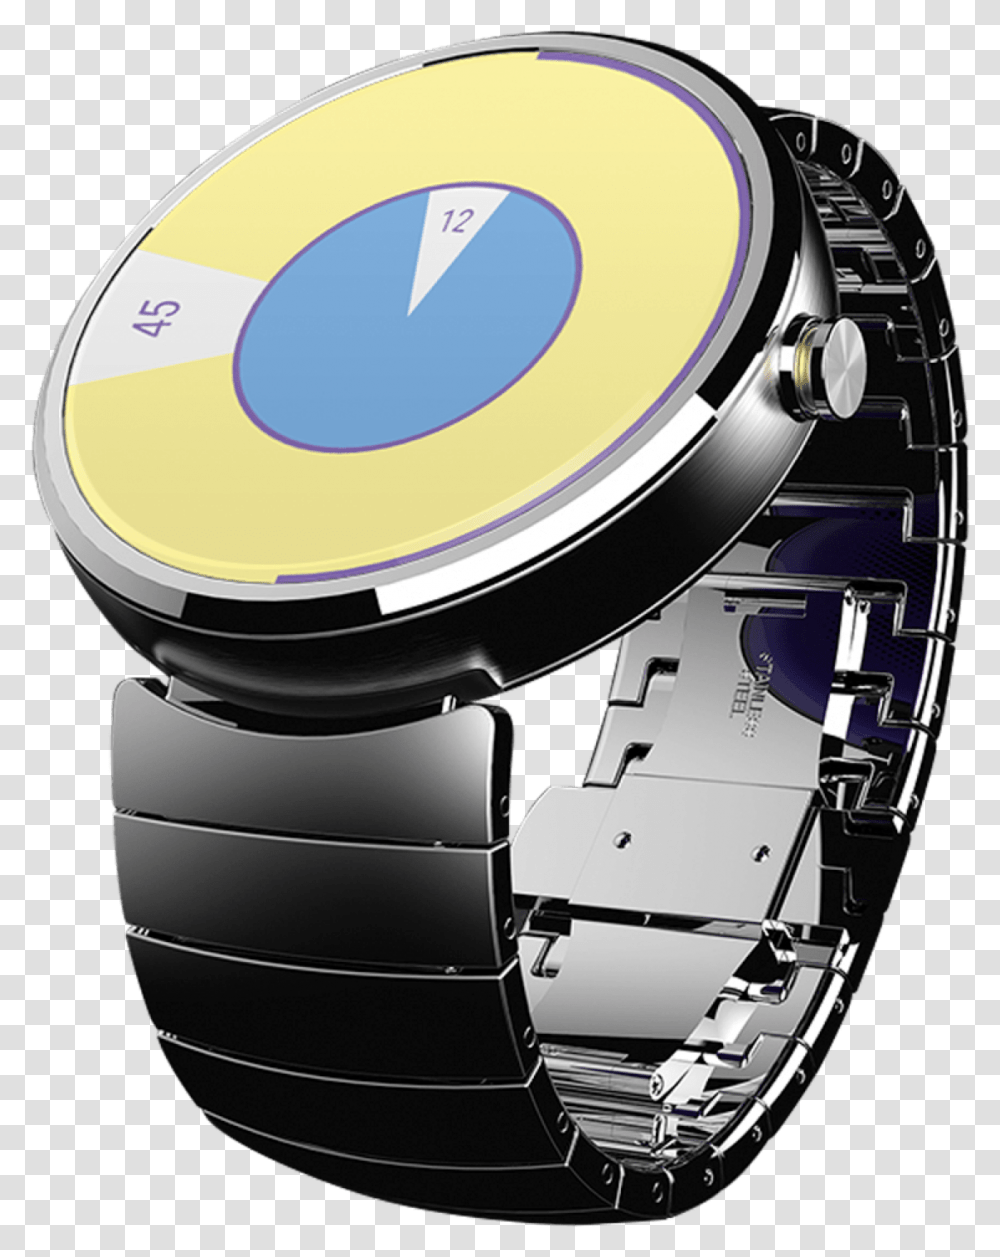 Yummy Watch Face Best Watches Under 2000 Rupees, Wristwatch, Drum, Percussion, Musical Instrument Transparent Png